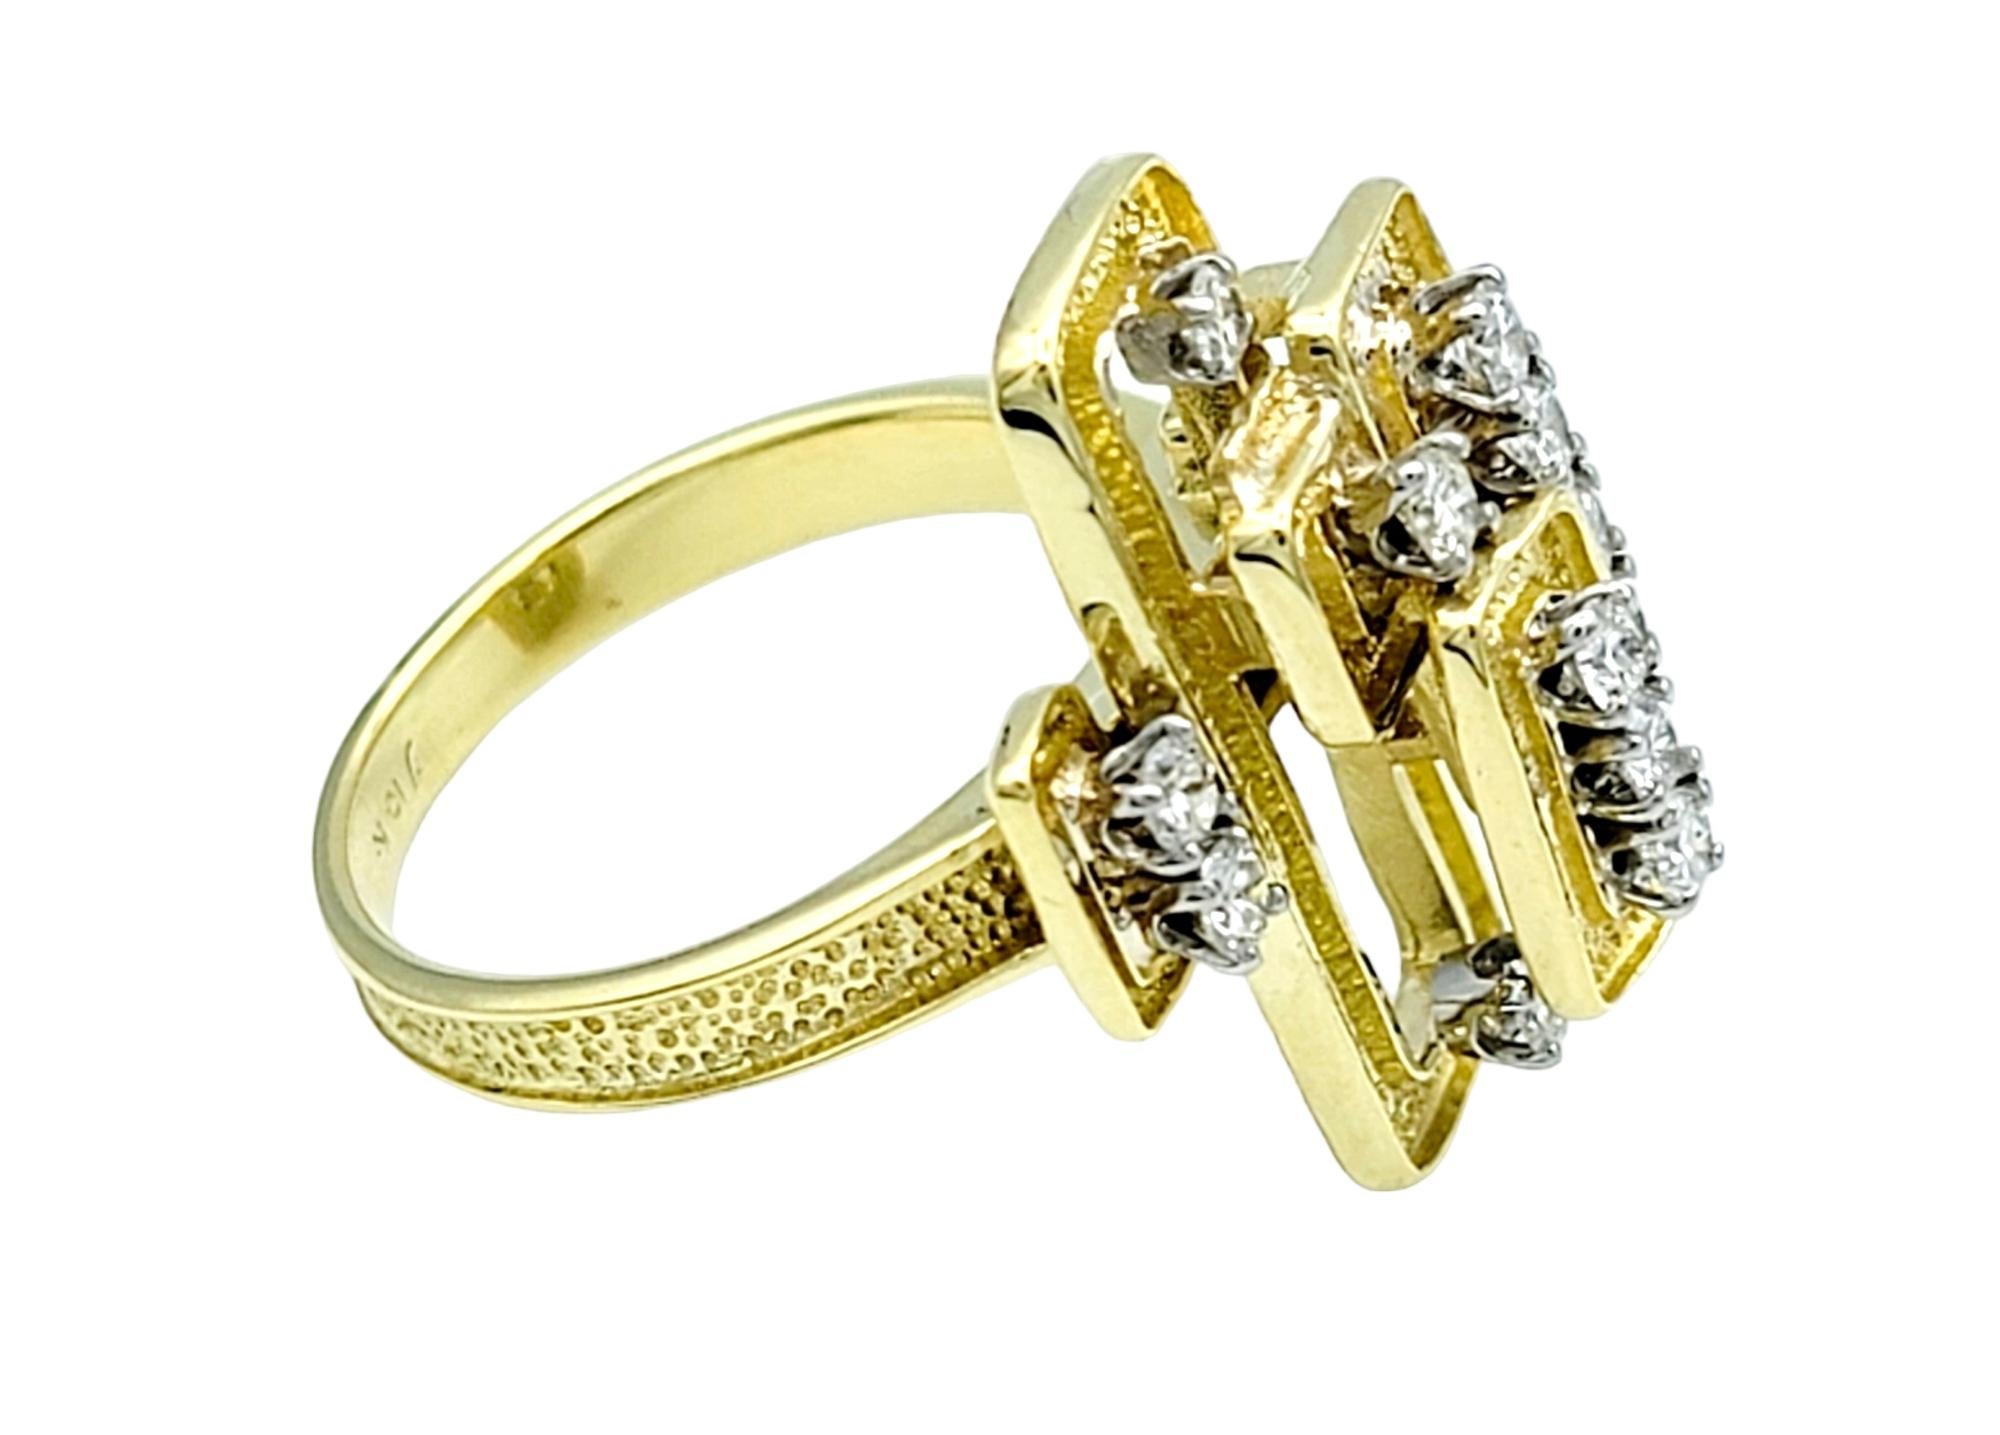 Stacked Geometric Cocktail Ring with Diamonds in Textured 18 Karat Yellow Gold In Good Condition For Sale In Scottsdale, AZ